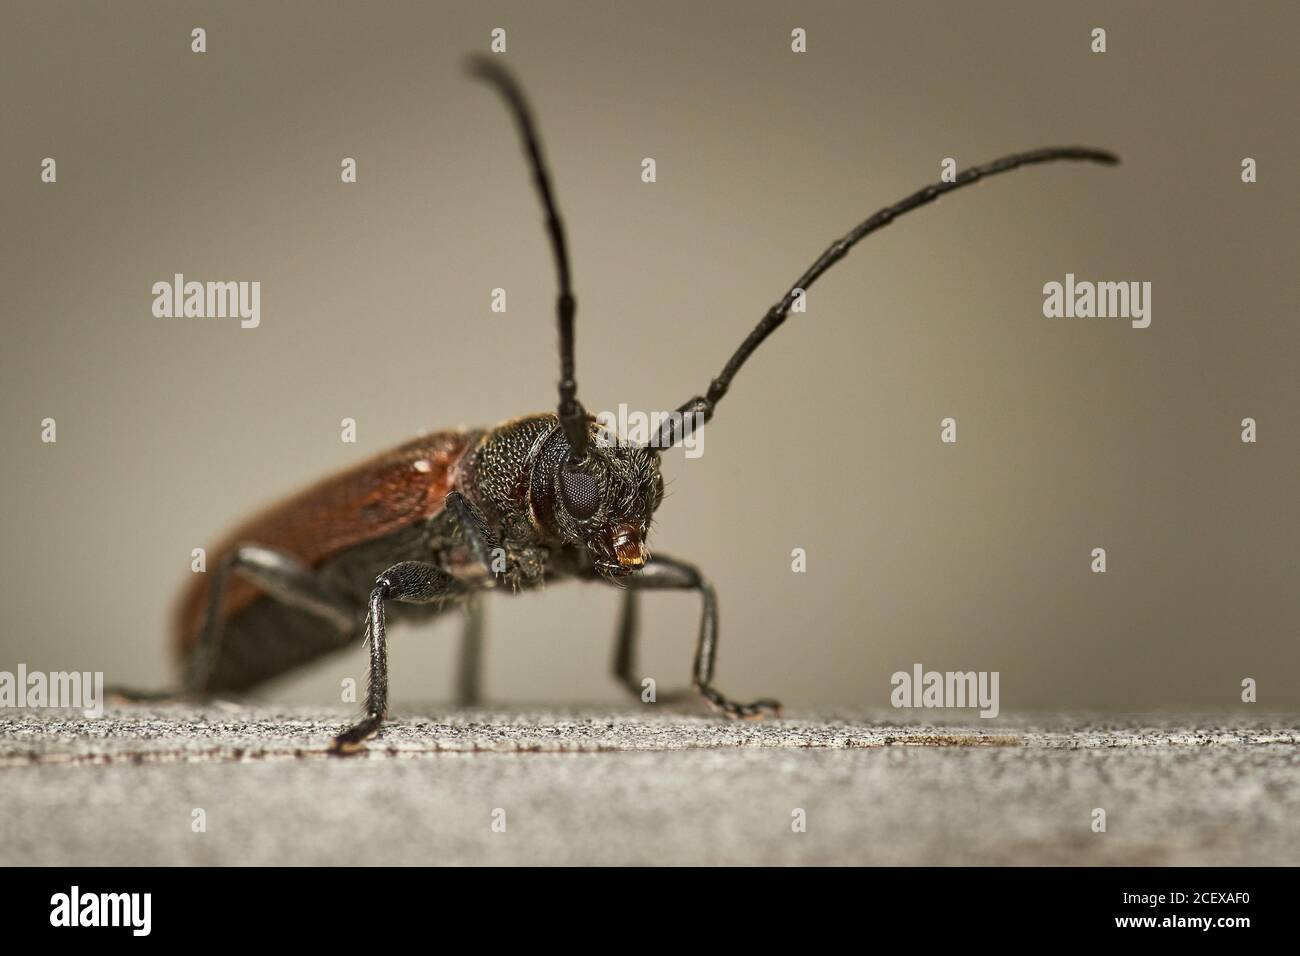 detailed close-up macro of a brown longhorn beetle sitting on wooden surface Stock Photo